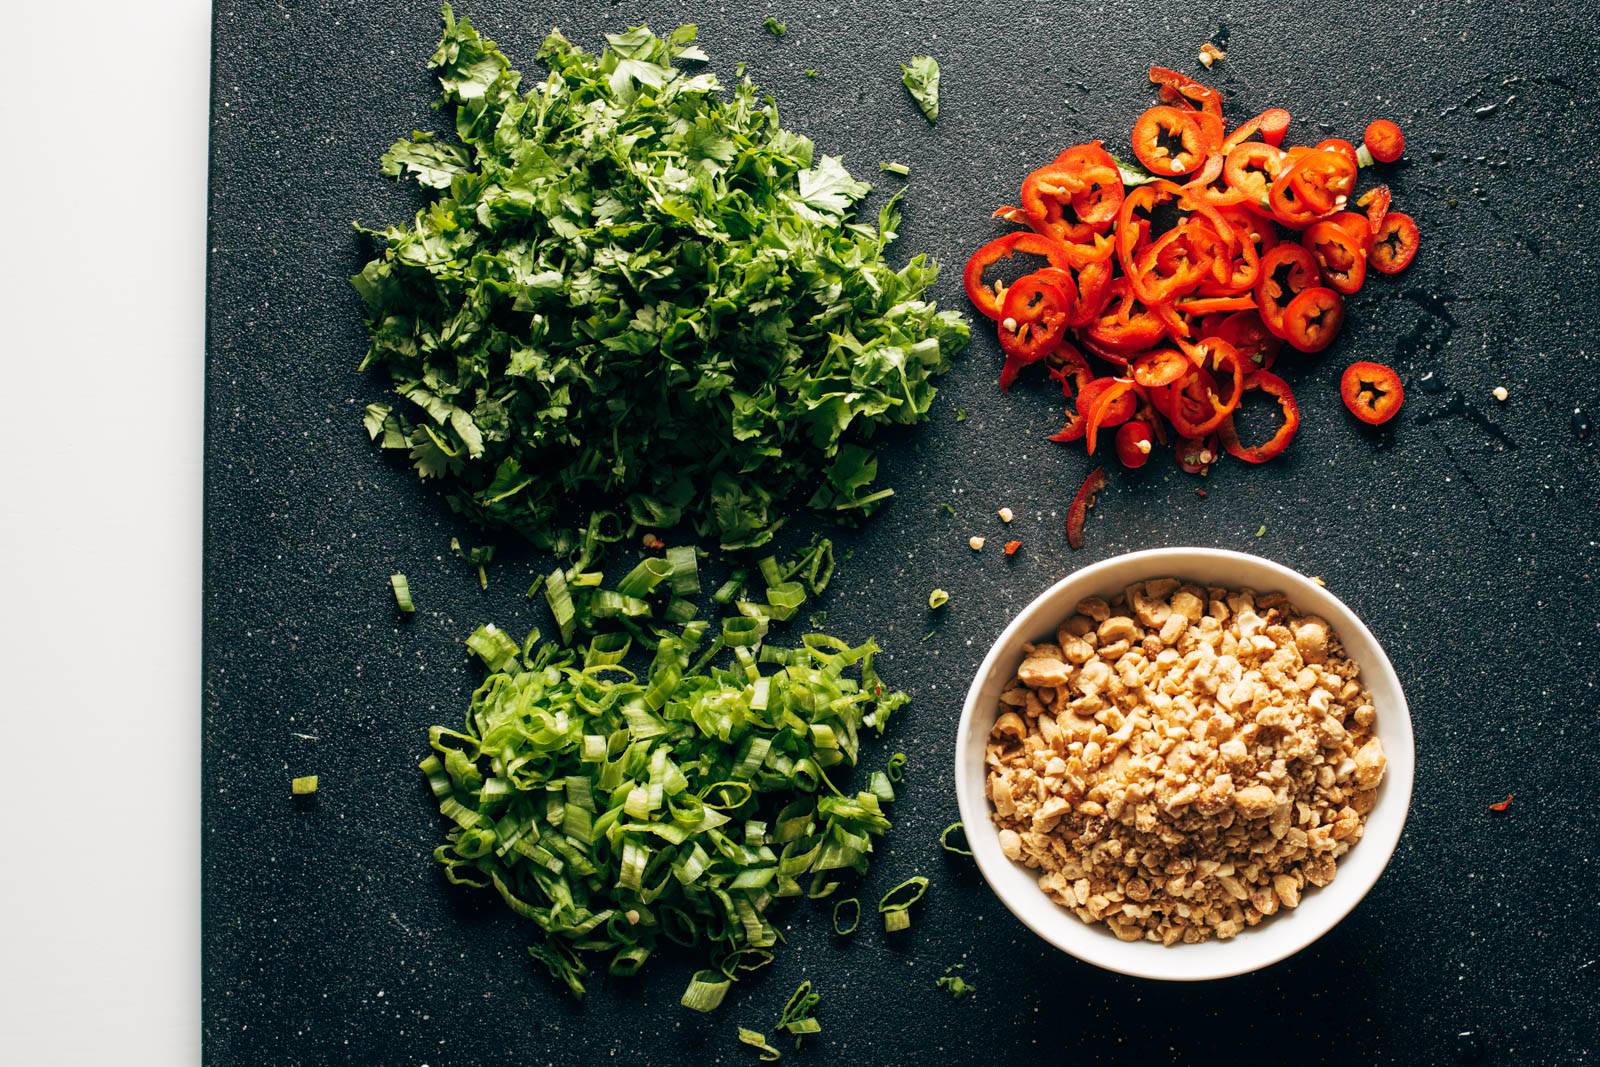 Chopped herbs, peppers, and peanuts on a cutting board